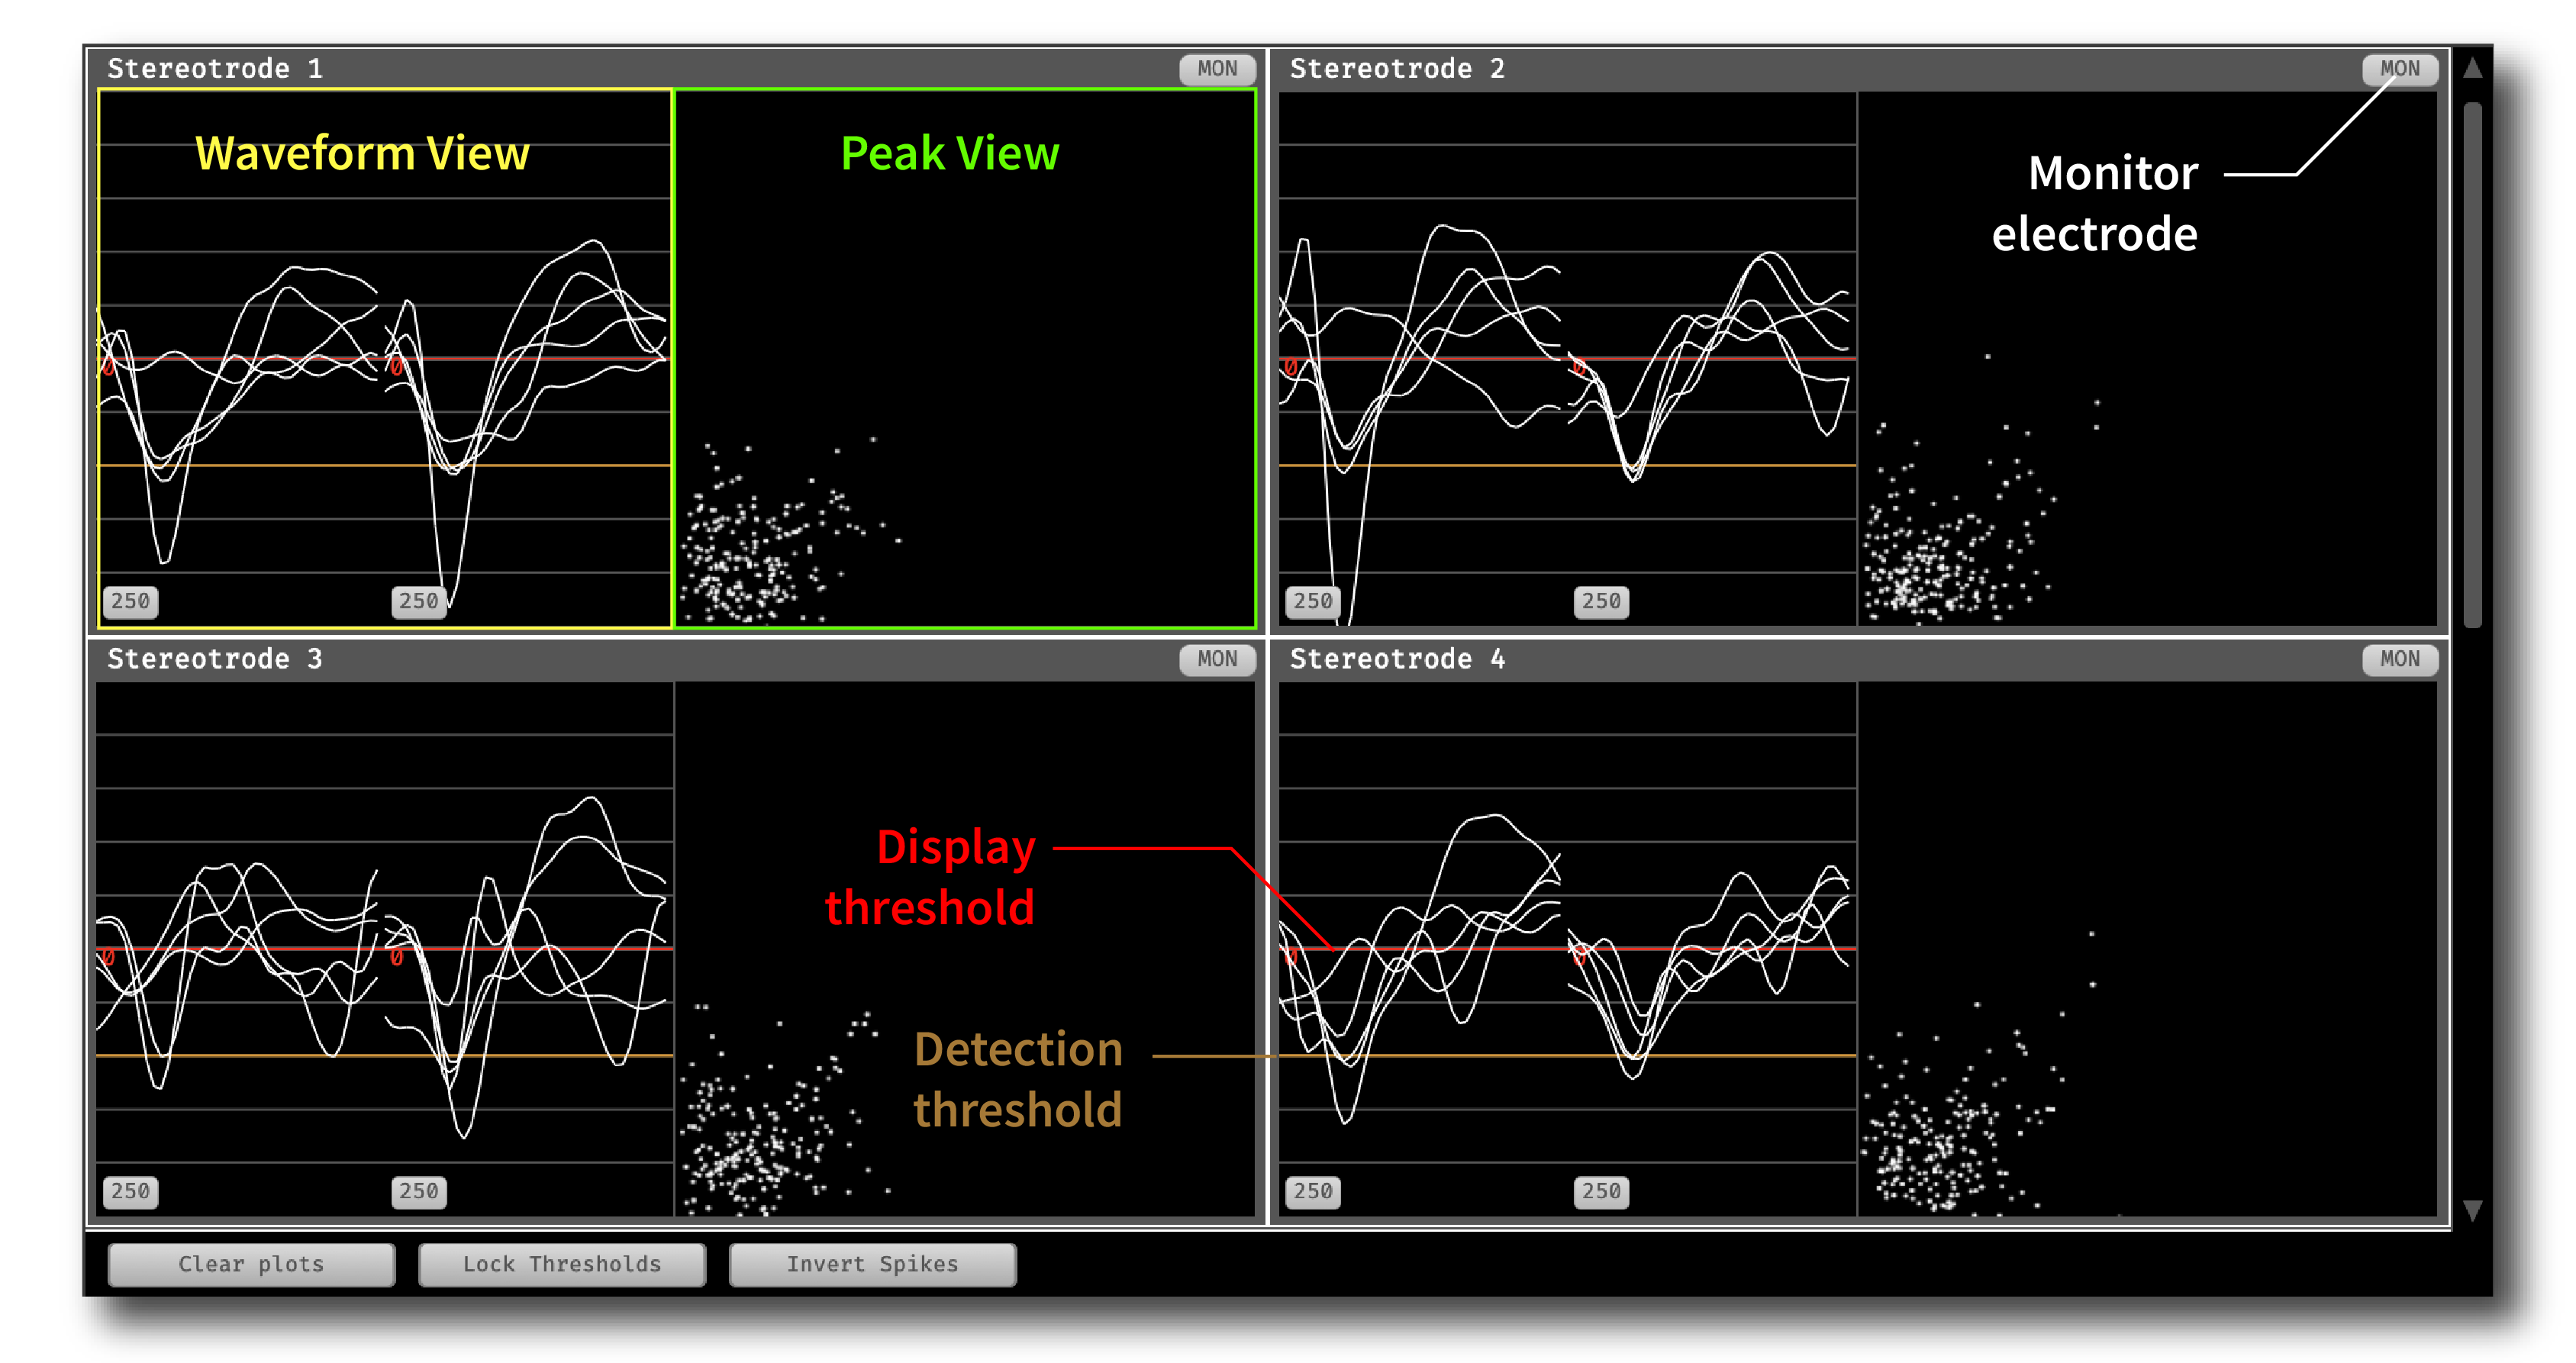 Annotated Spike Viewer settings interface